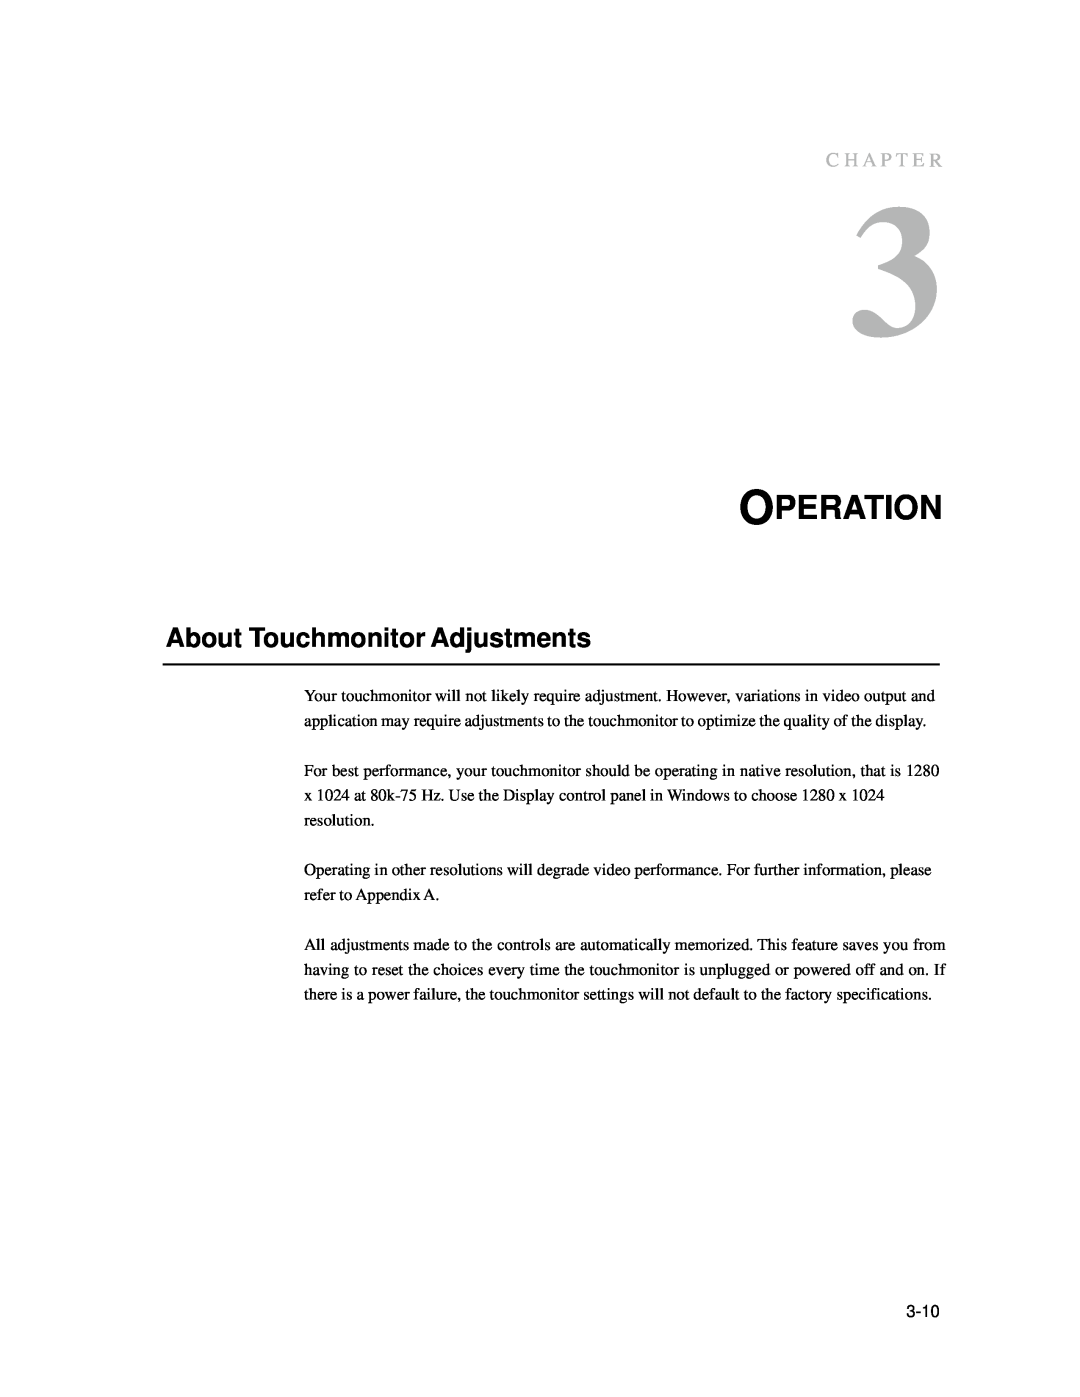 Elo TouchSystems 1939L manual Operation, About Touchmonitor Adjustments, C H A P T E R 